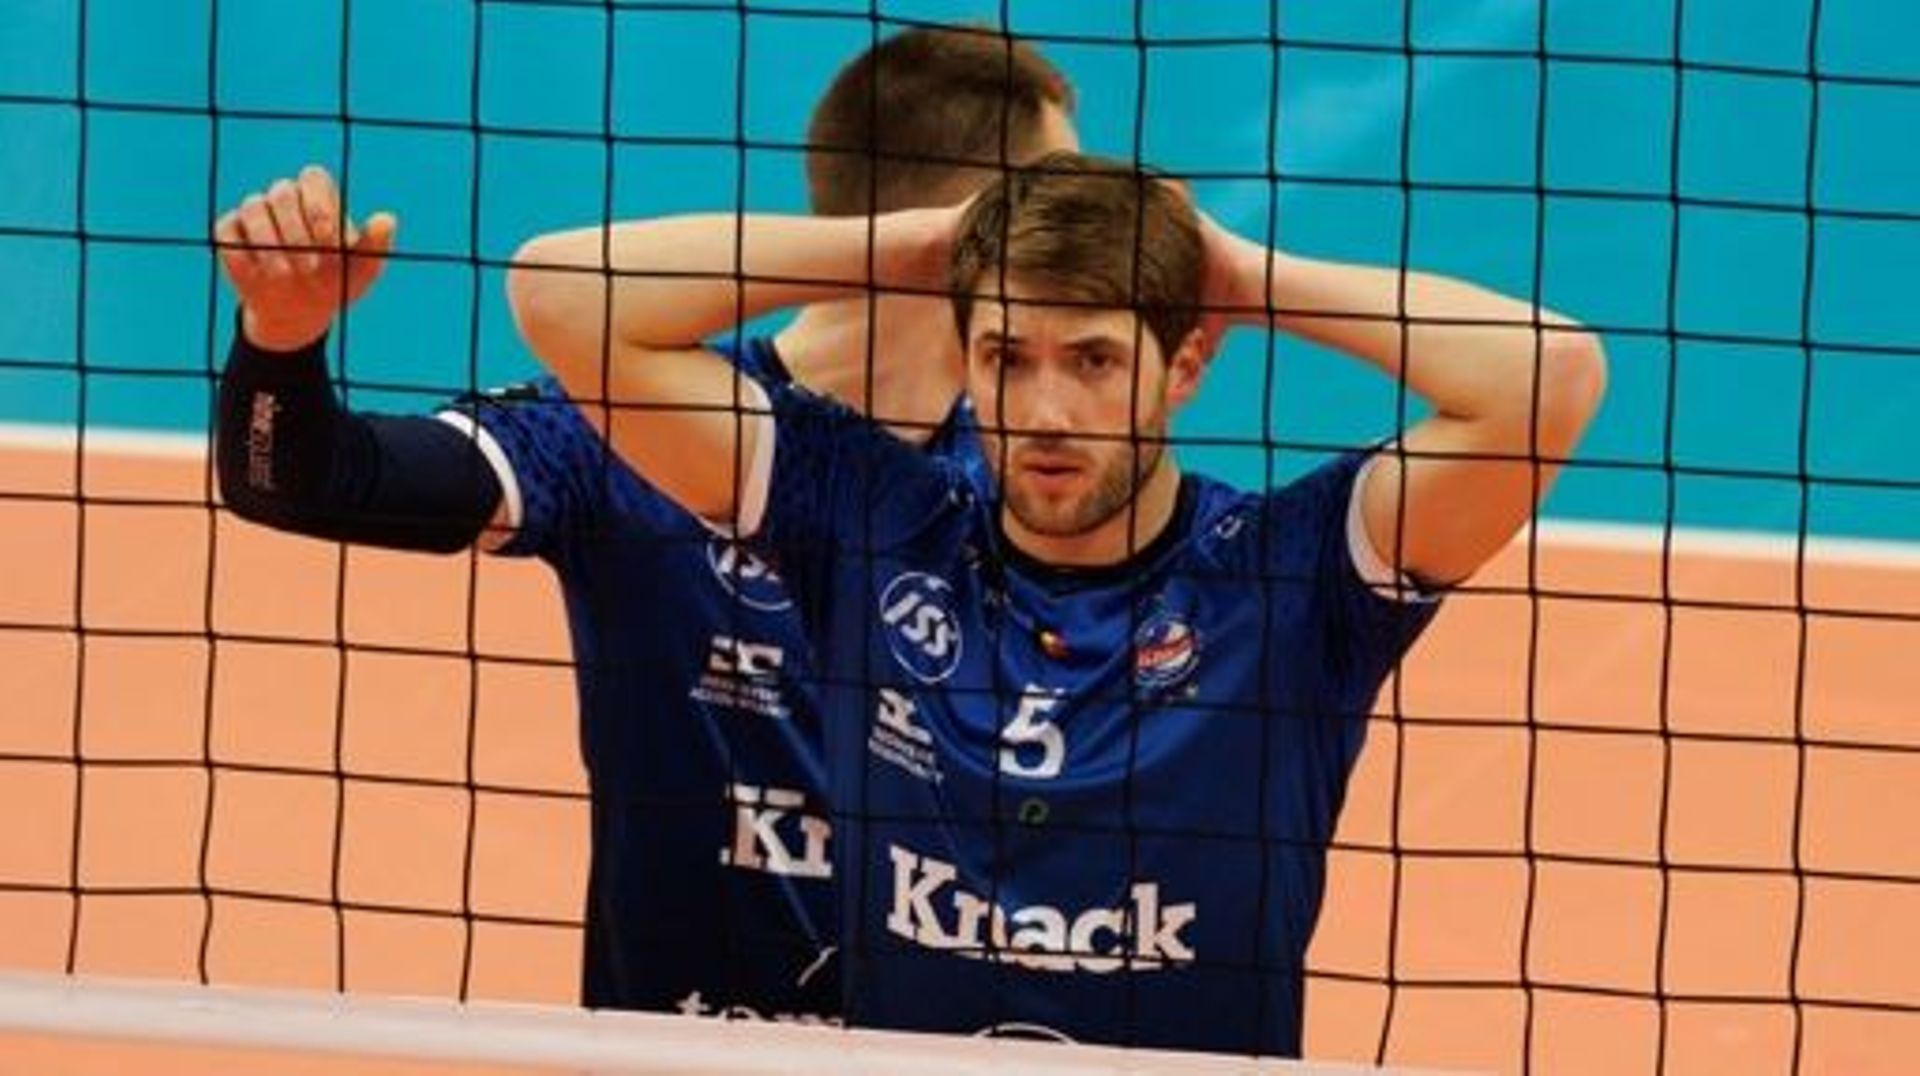 Roeselare’s Pieter Coolman looks dejected during a volleyball match between Knack Roeselare and Modena, second leg of the final of the men’s CEV Cup, Wednesday 05 April 2023 in Roeselare. BELGA PHOTO KURT DESPLENTER